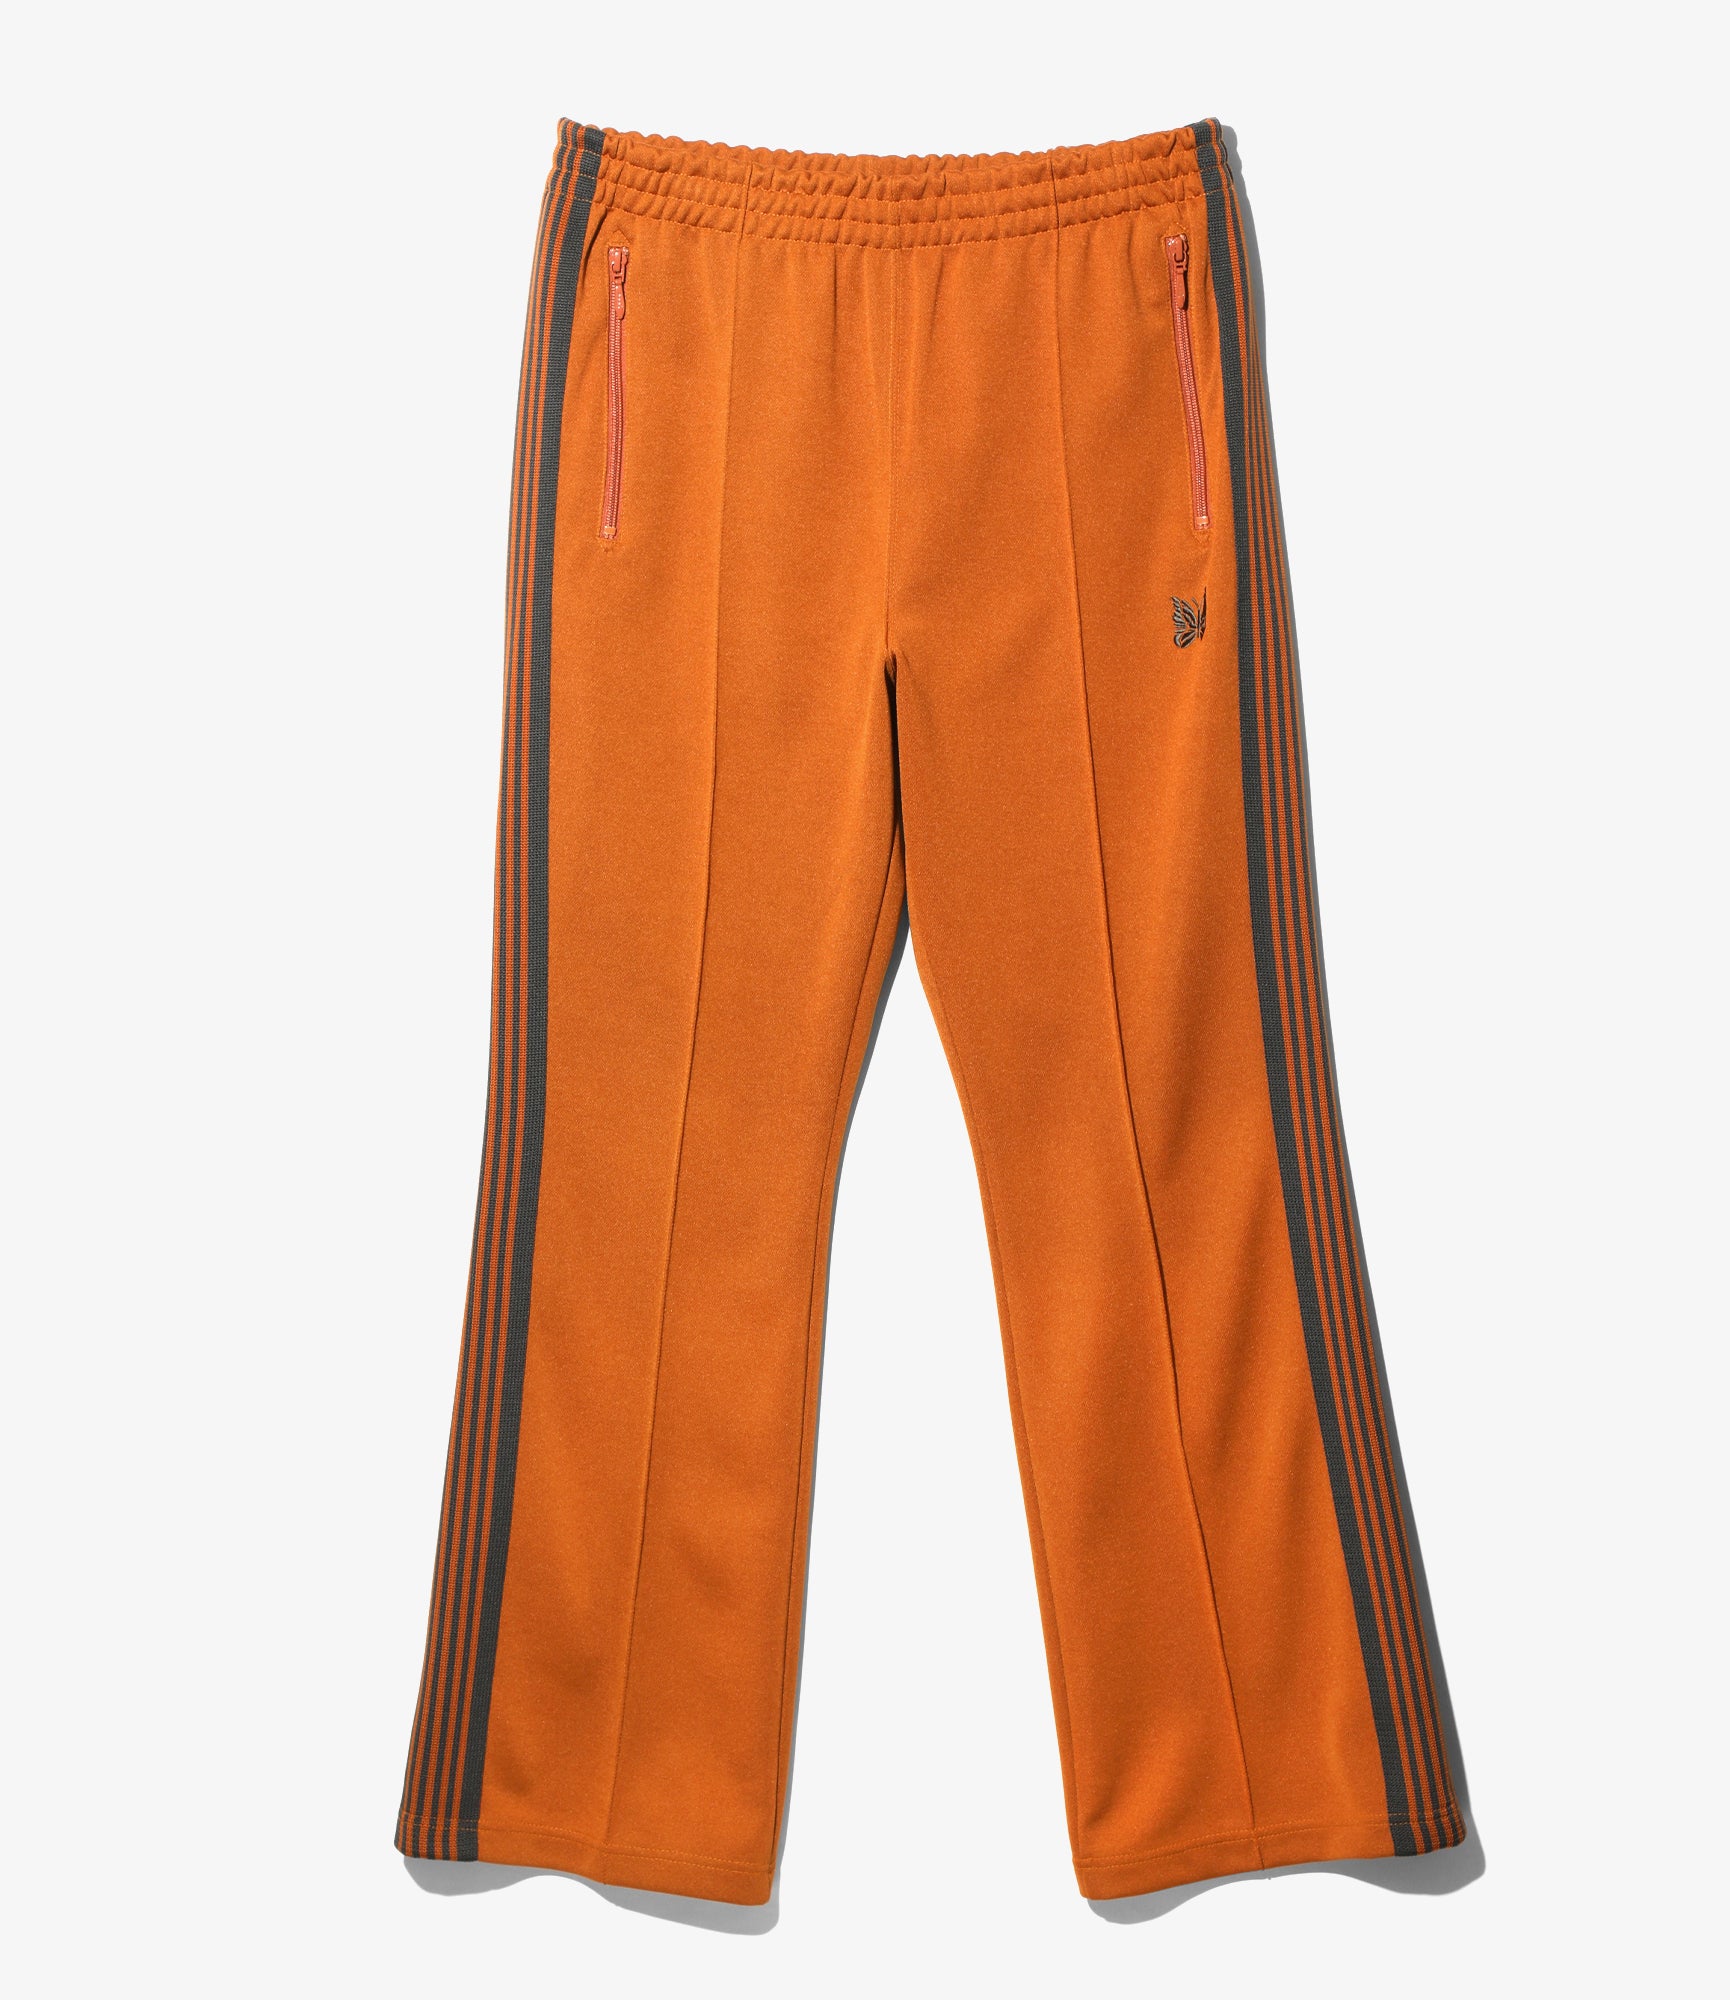 Trendy Track Pants to Shop for Spring